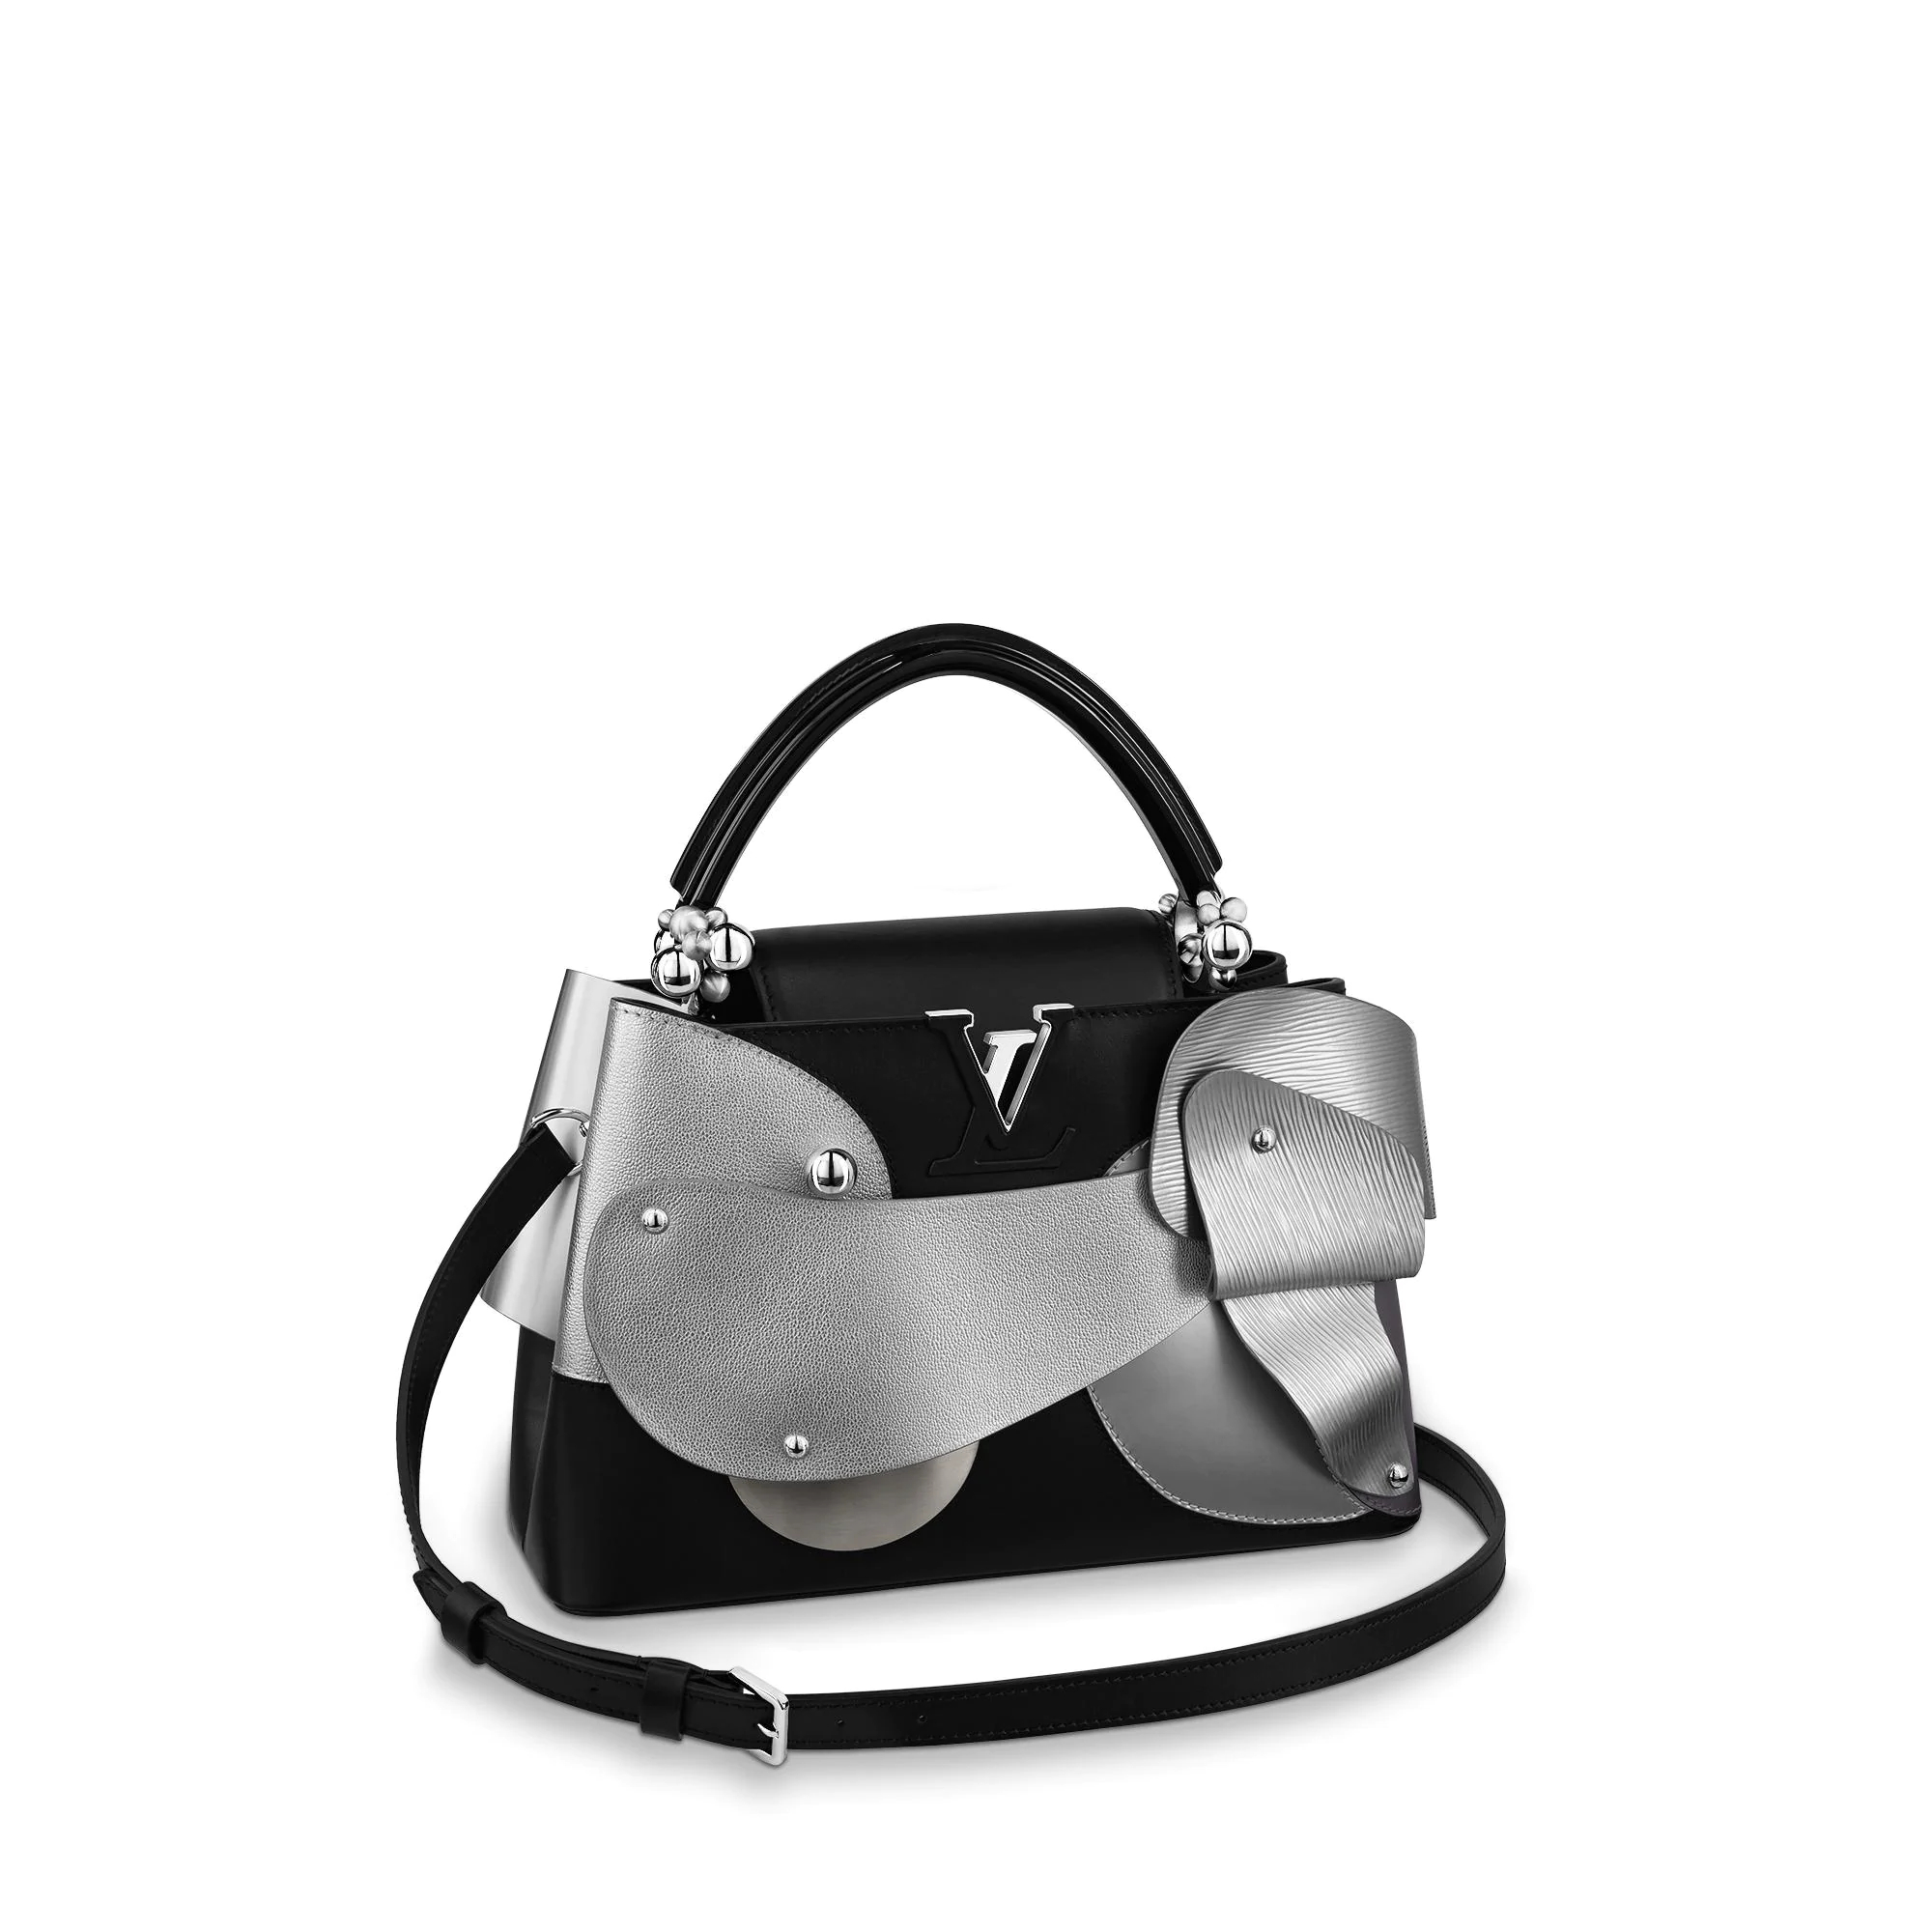 Louis Vuitton Delves Into Dark Material With Artycapucines Bag Line – WWD